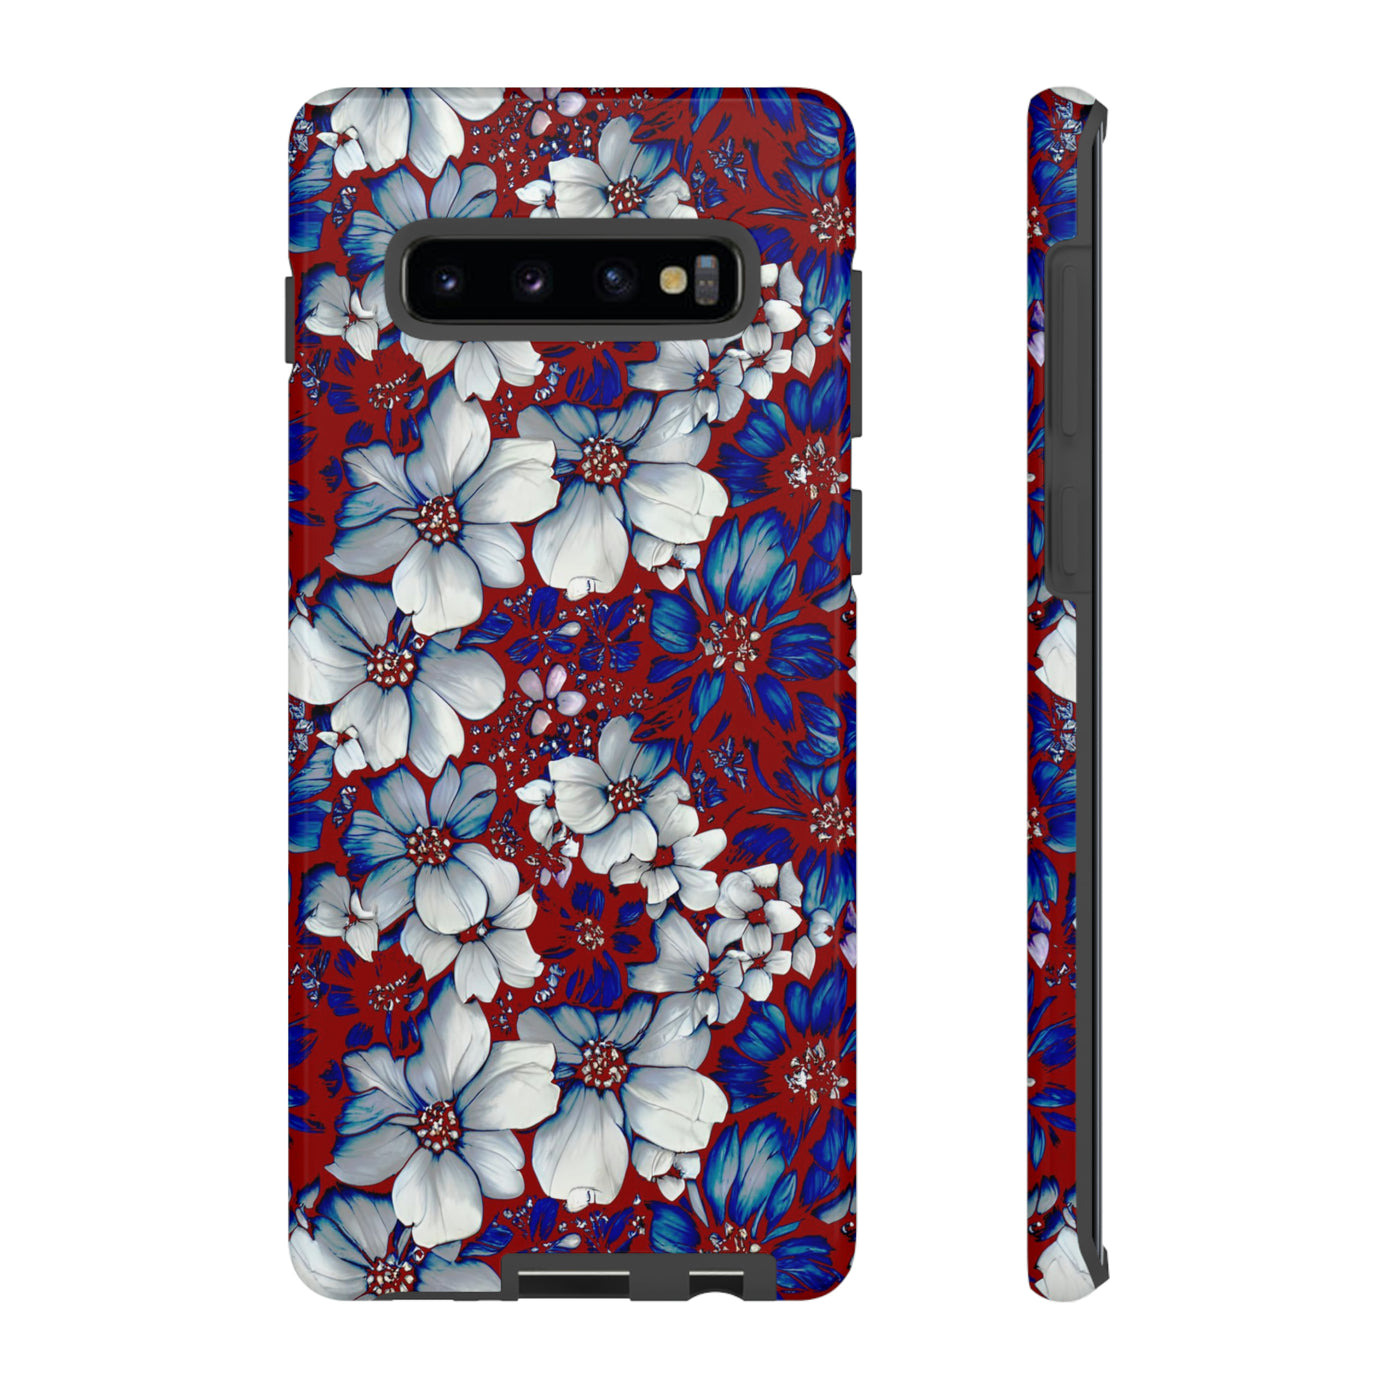 Cute Samsung Phone Case | Aesthetic Samsung Phone Case | Galaxy S23, S22, S21, S20 | Red Blue Flowers, Protective Phone Case